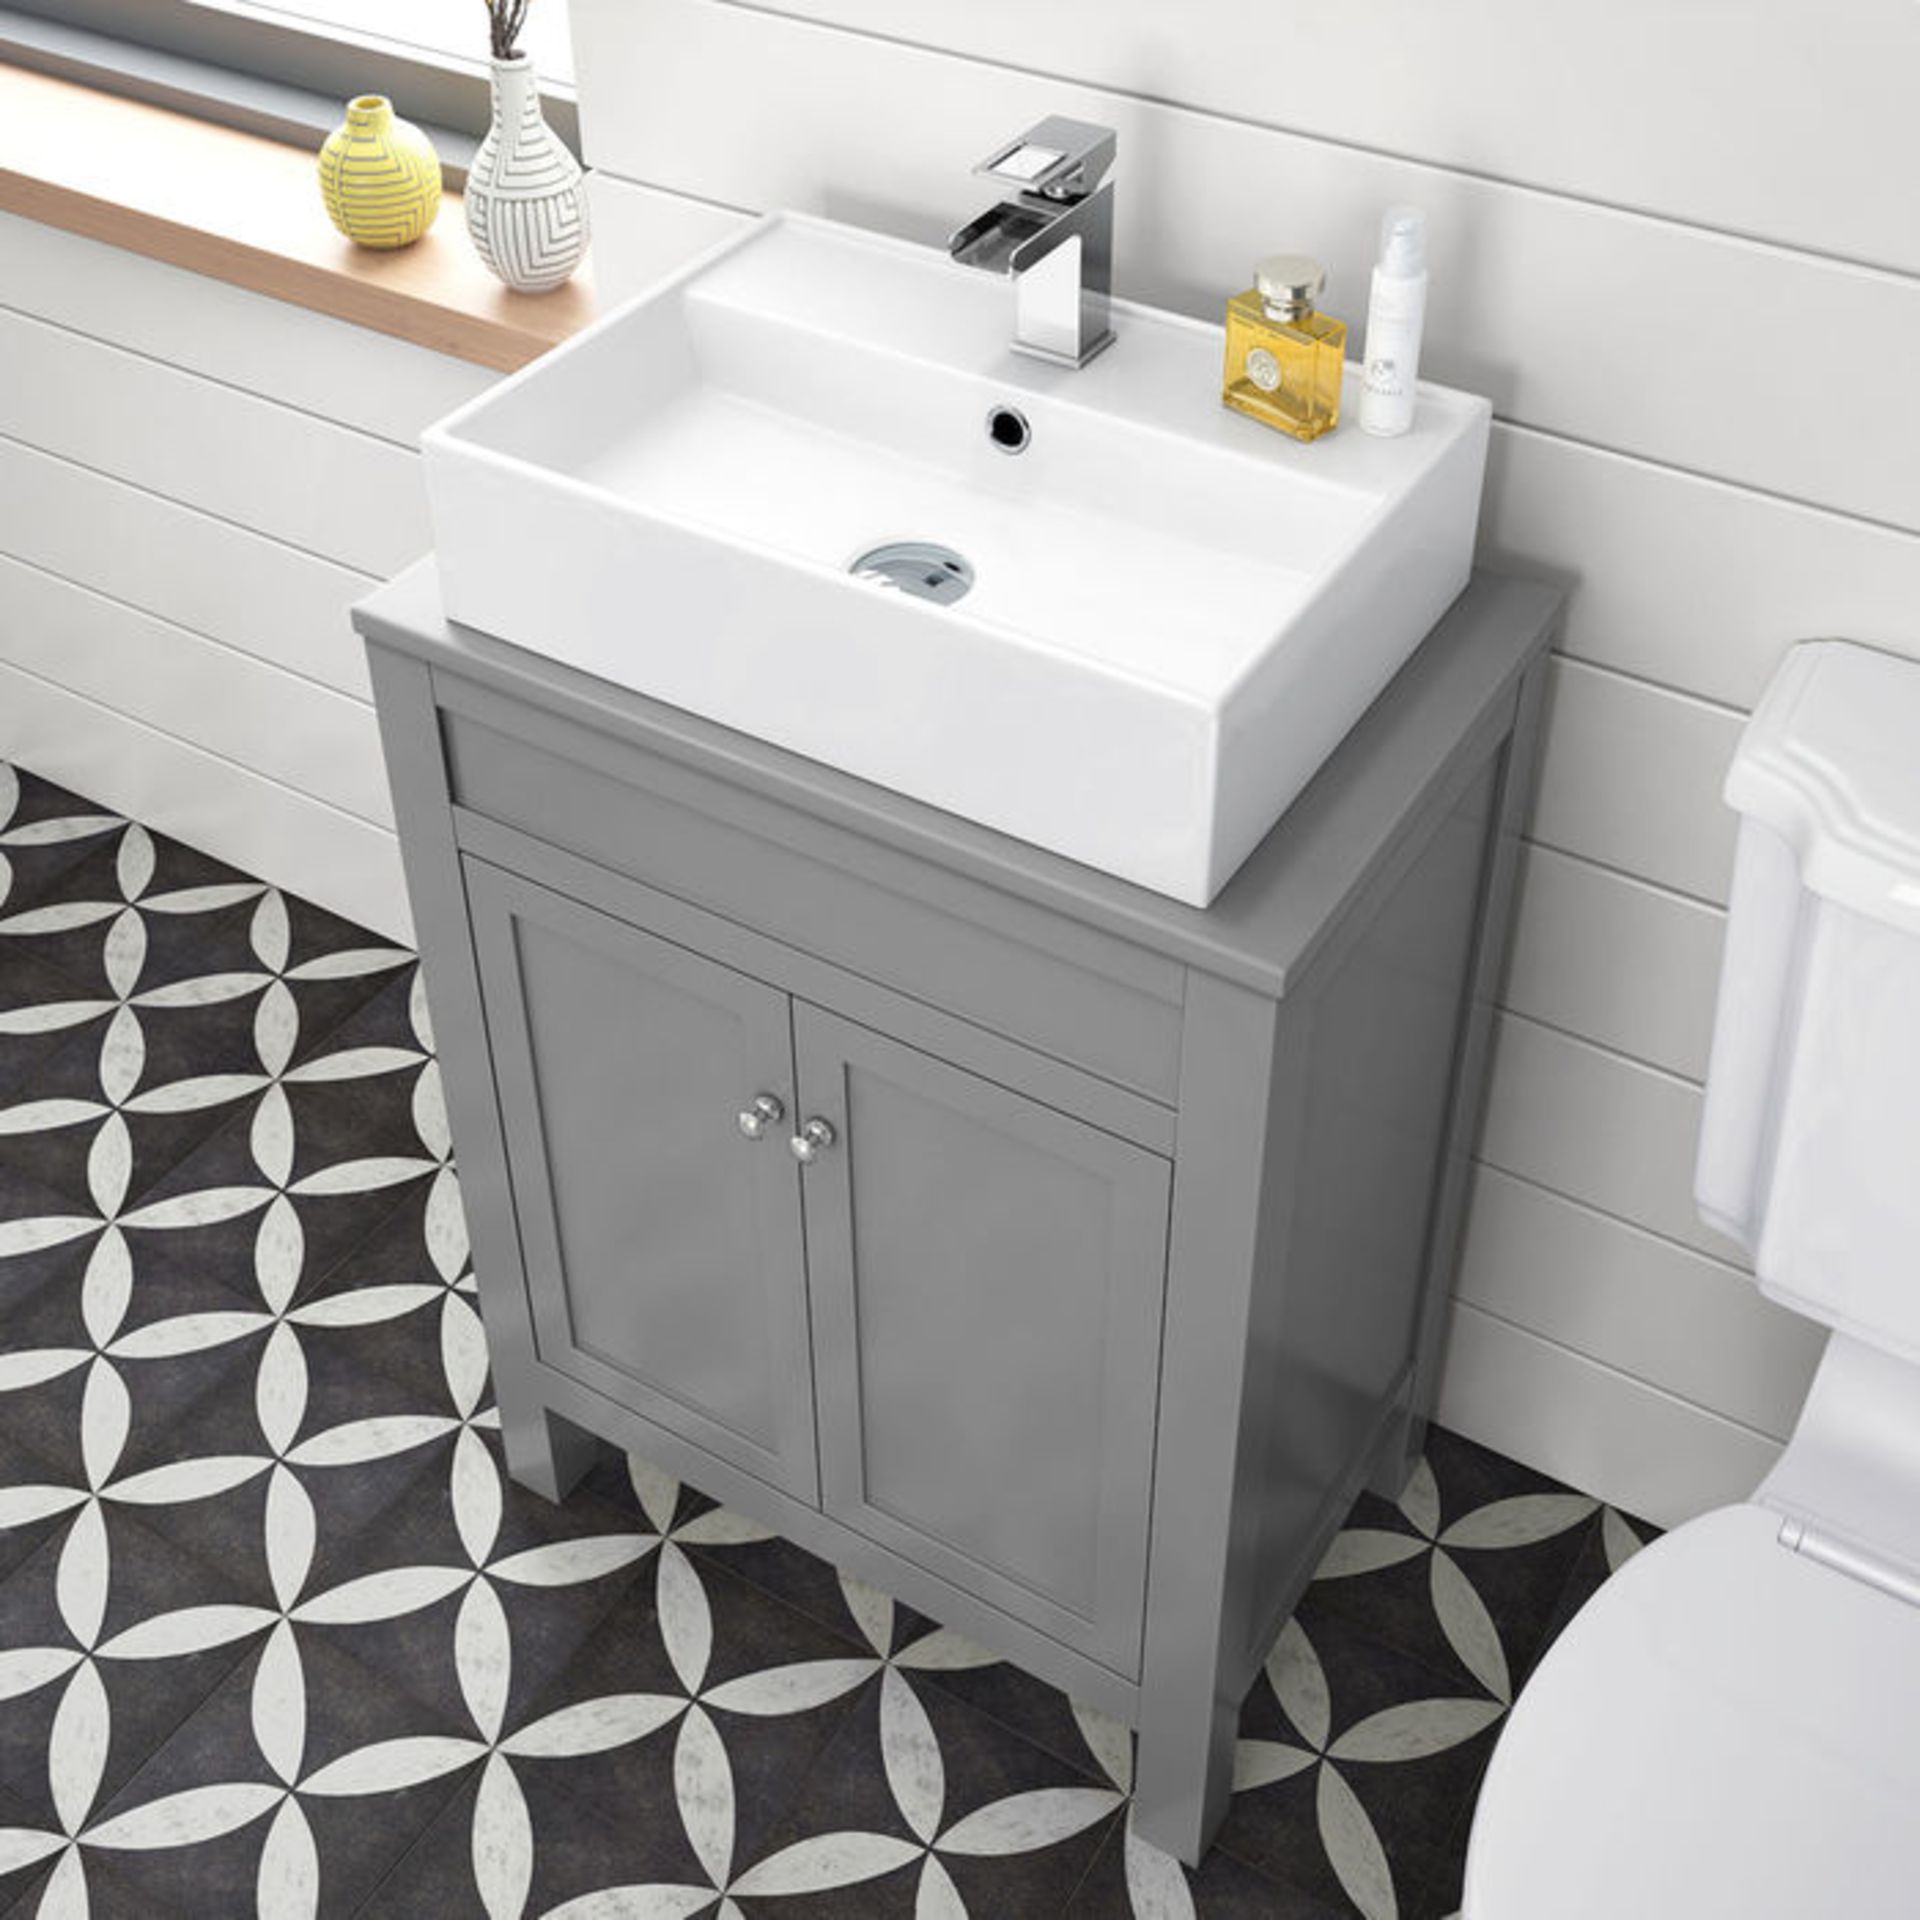 (KL72) 600mm Melbourne Grey Countertop Unit and Elisa Basin - Floor Standing. RRP £499.99. Comes - Image 3 of 4